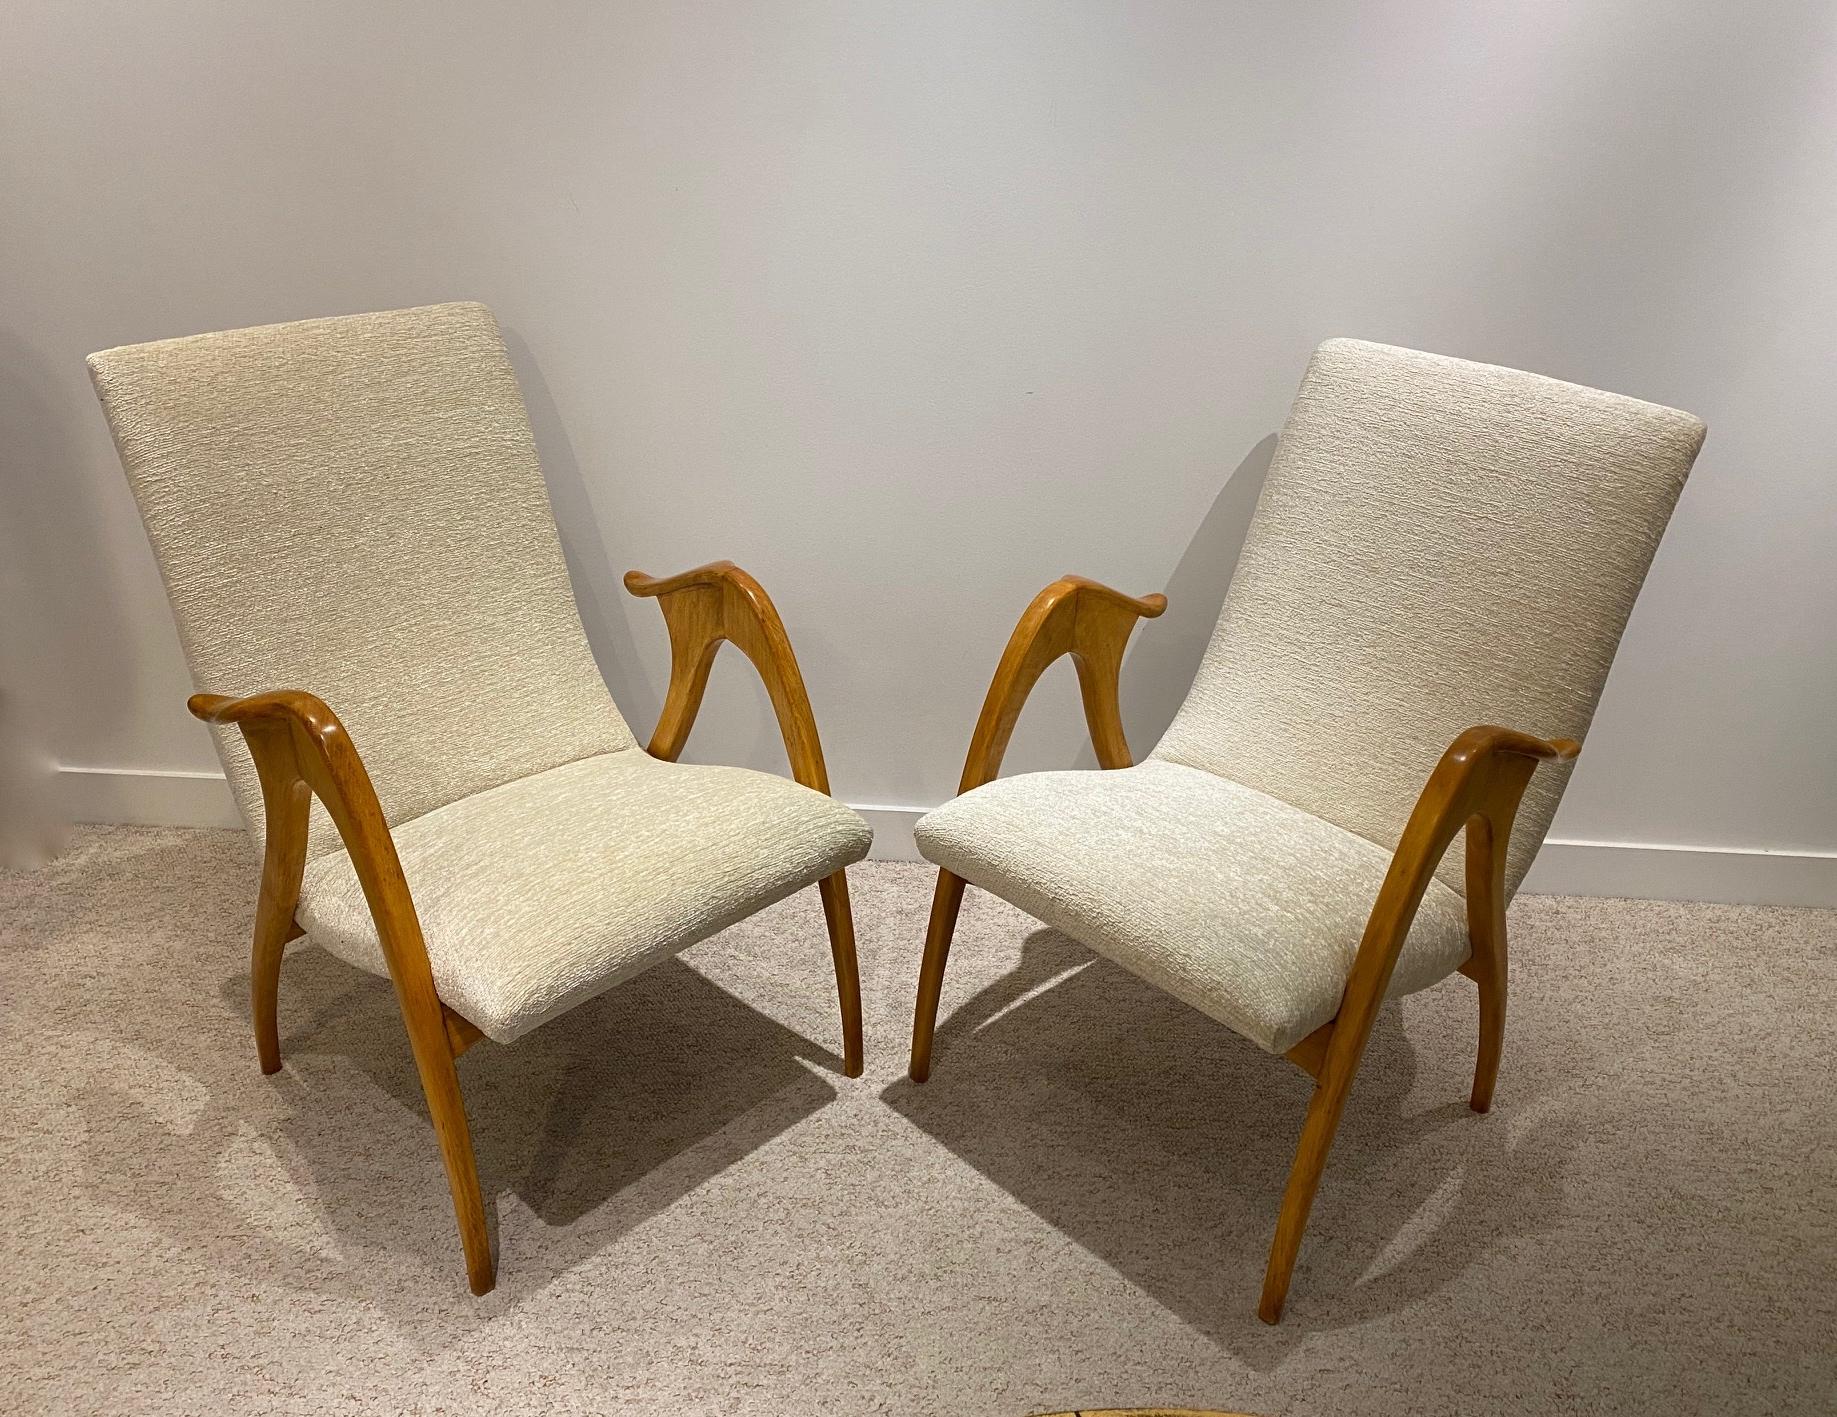 Italian Design Pair of Maple Wood Chairs by Malatesta and Masson, Italy, 1950s 2